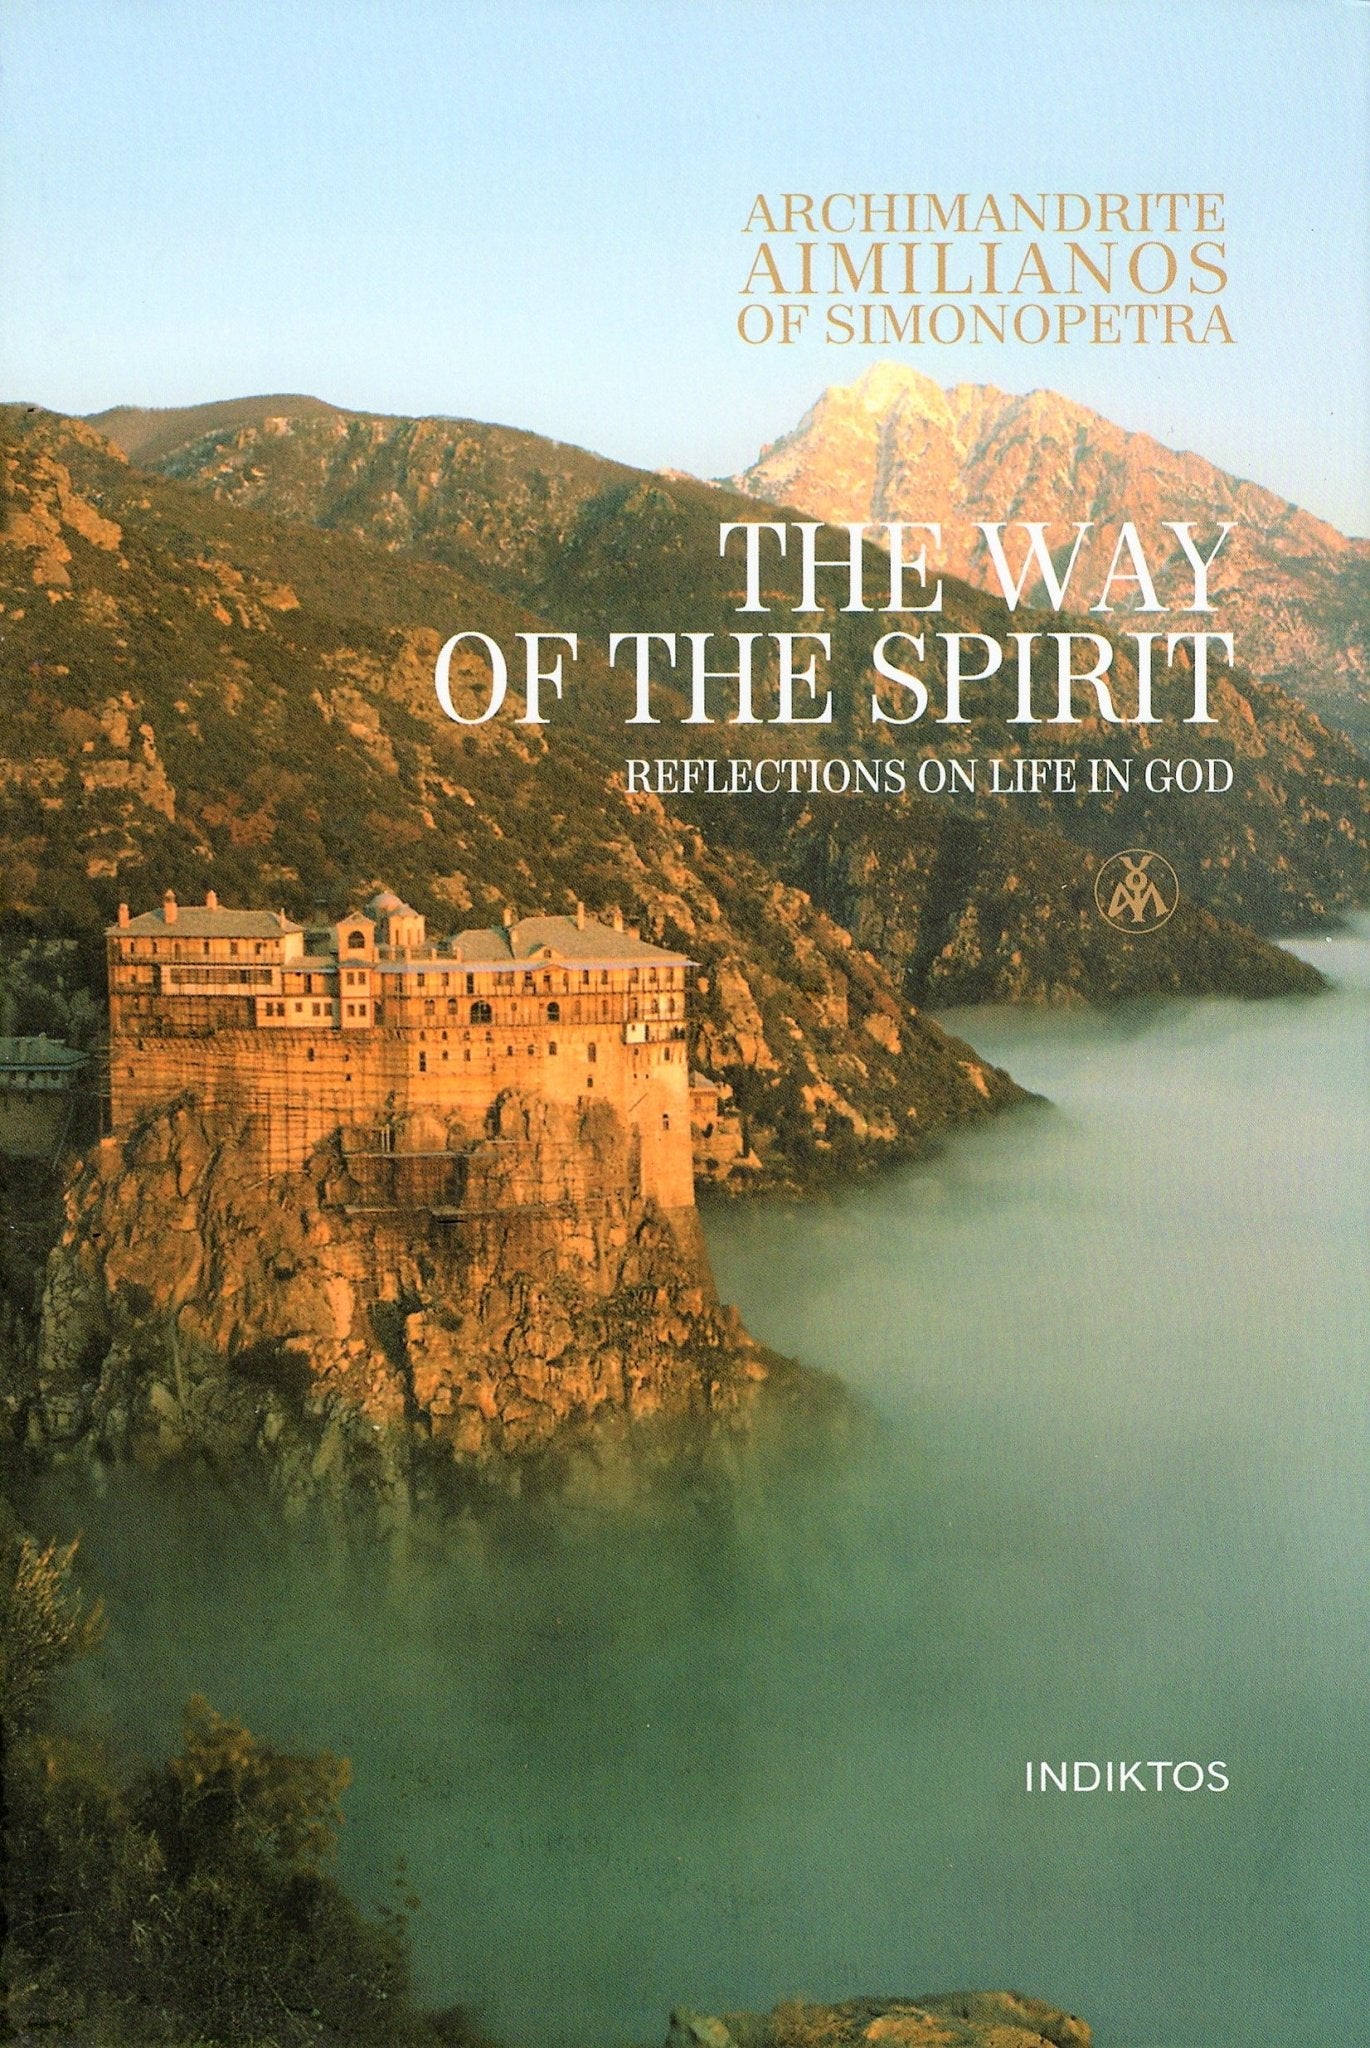 The Way of the Spirit - Reflections on Life in God - Holy Cross Monastery